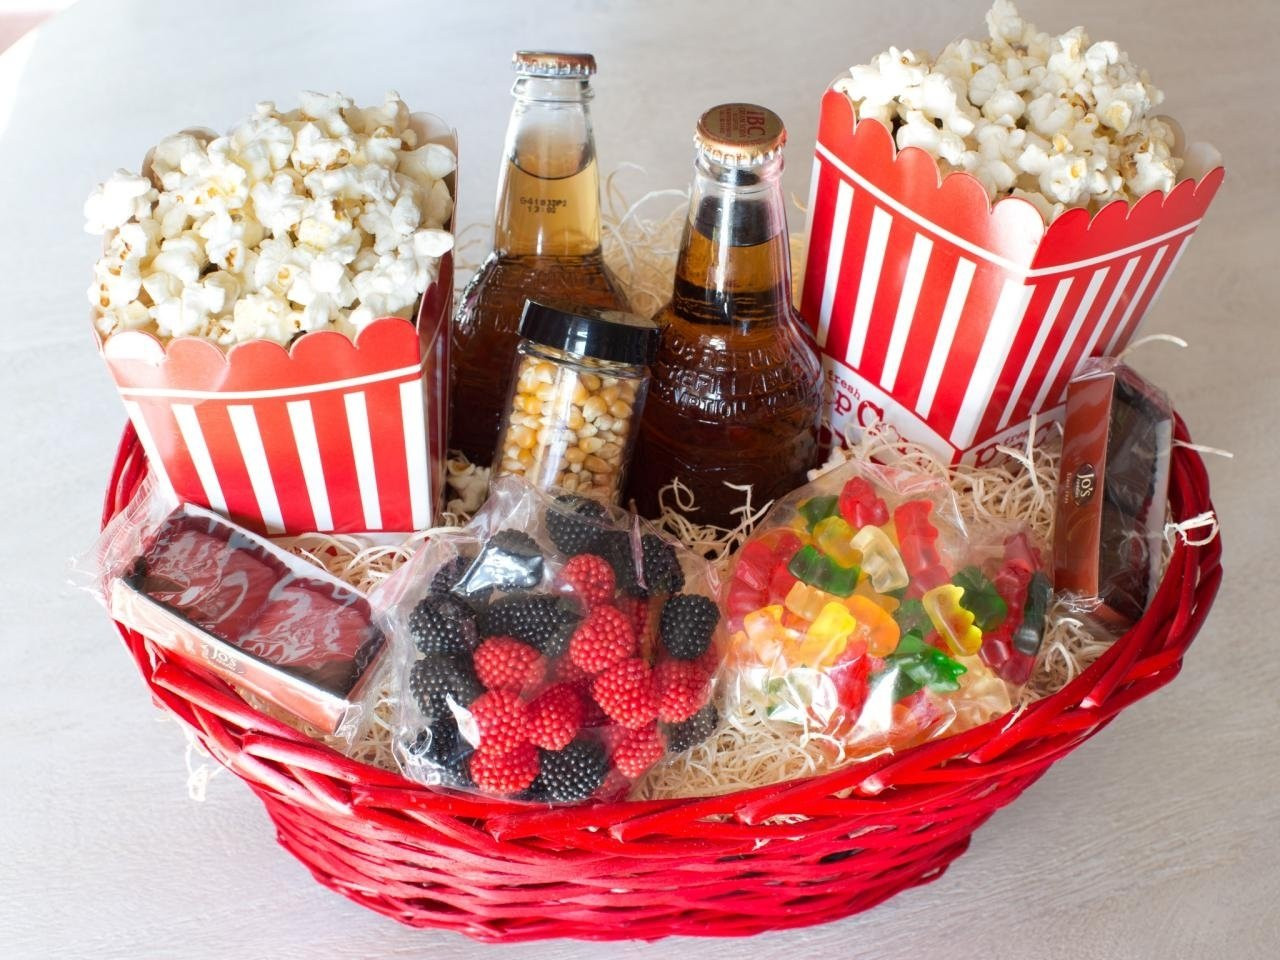 Homemade Gift Baskets Ideas For Christmas
 10 Unique Movie Themed Gift Basket Ideas 2020